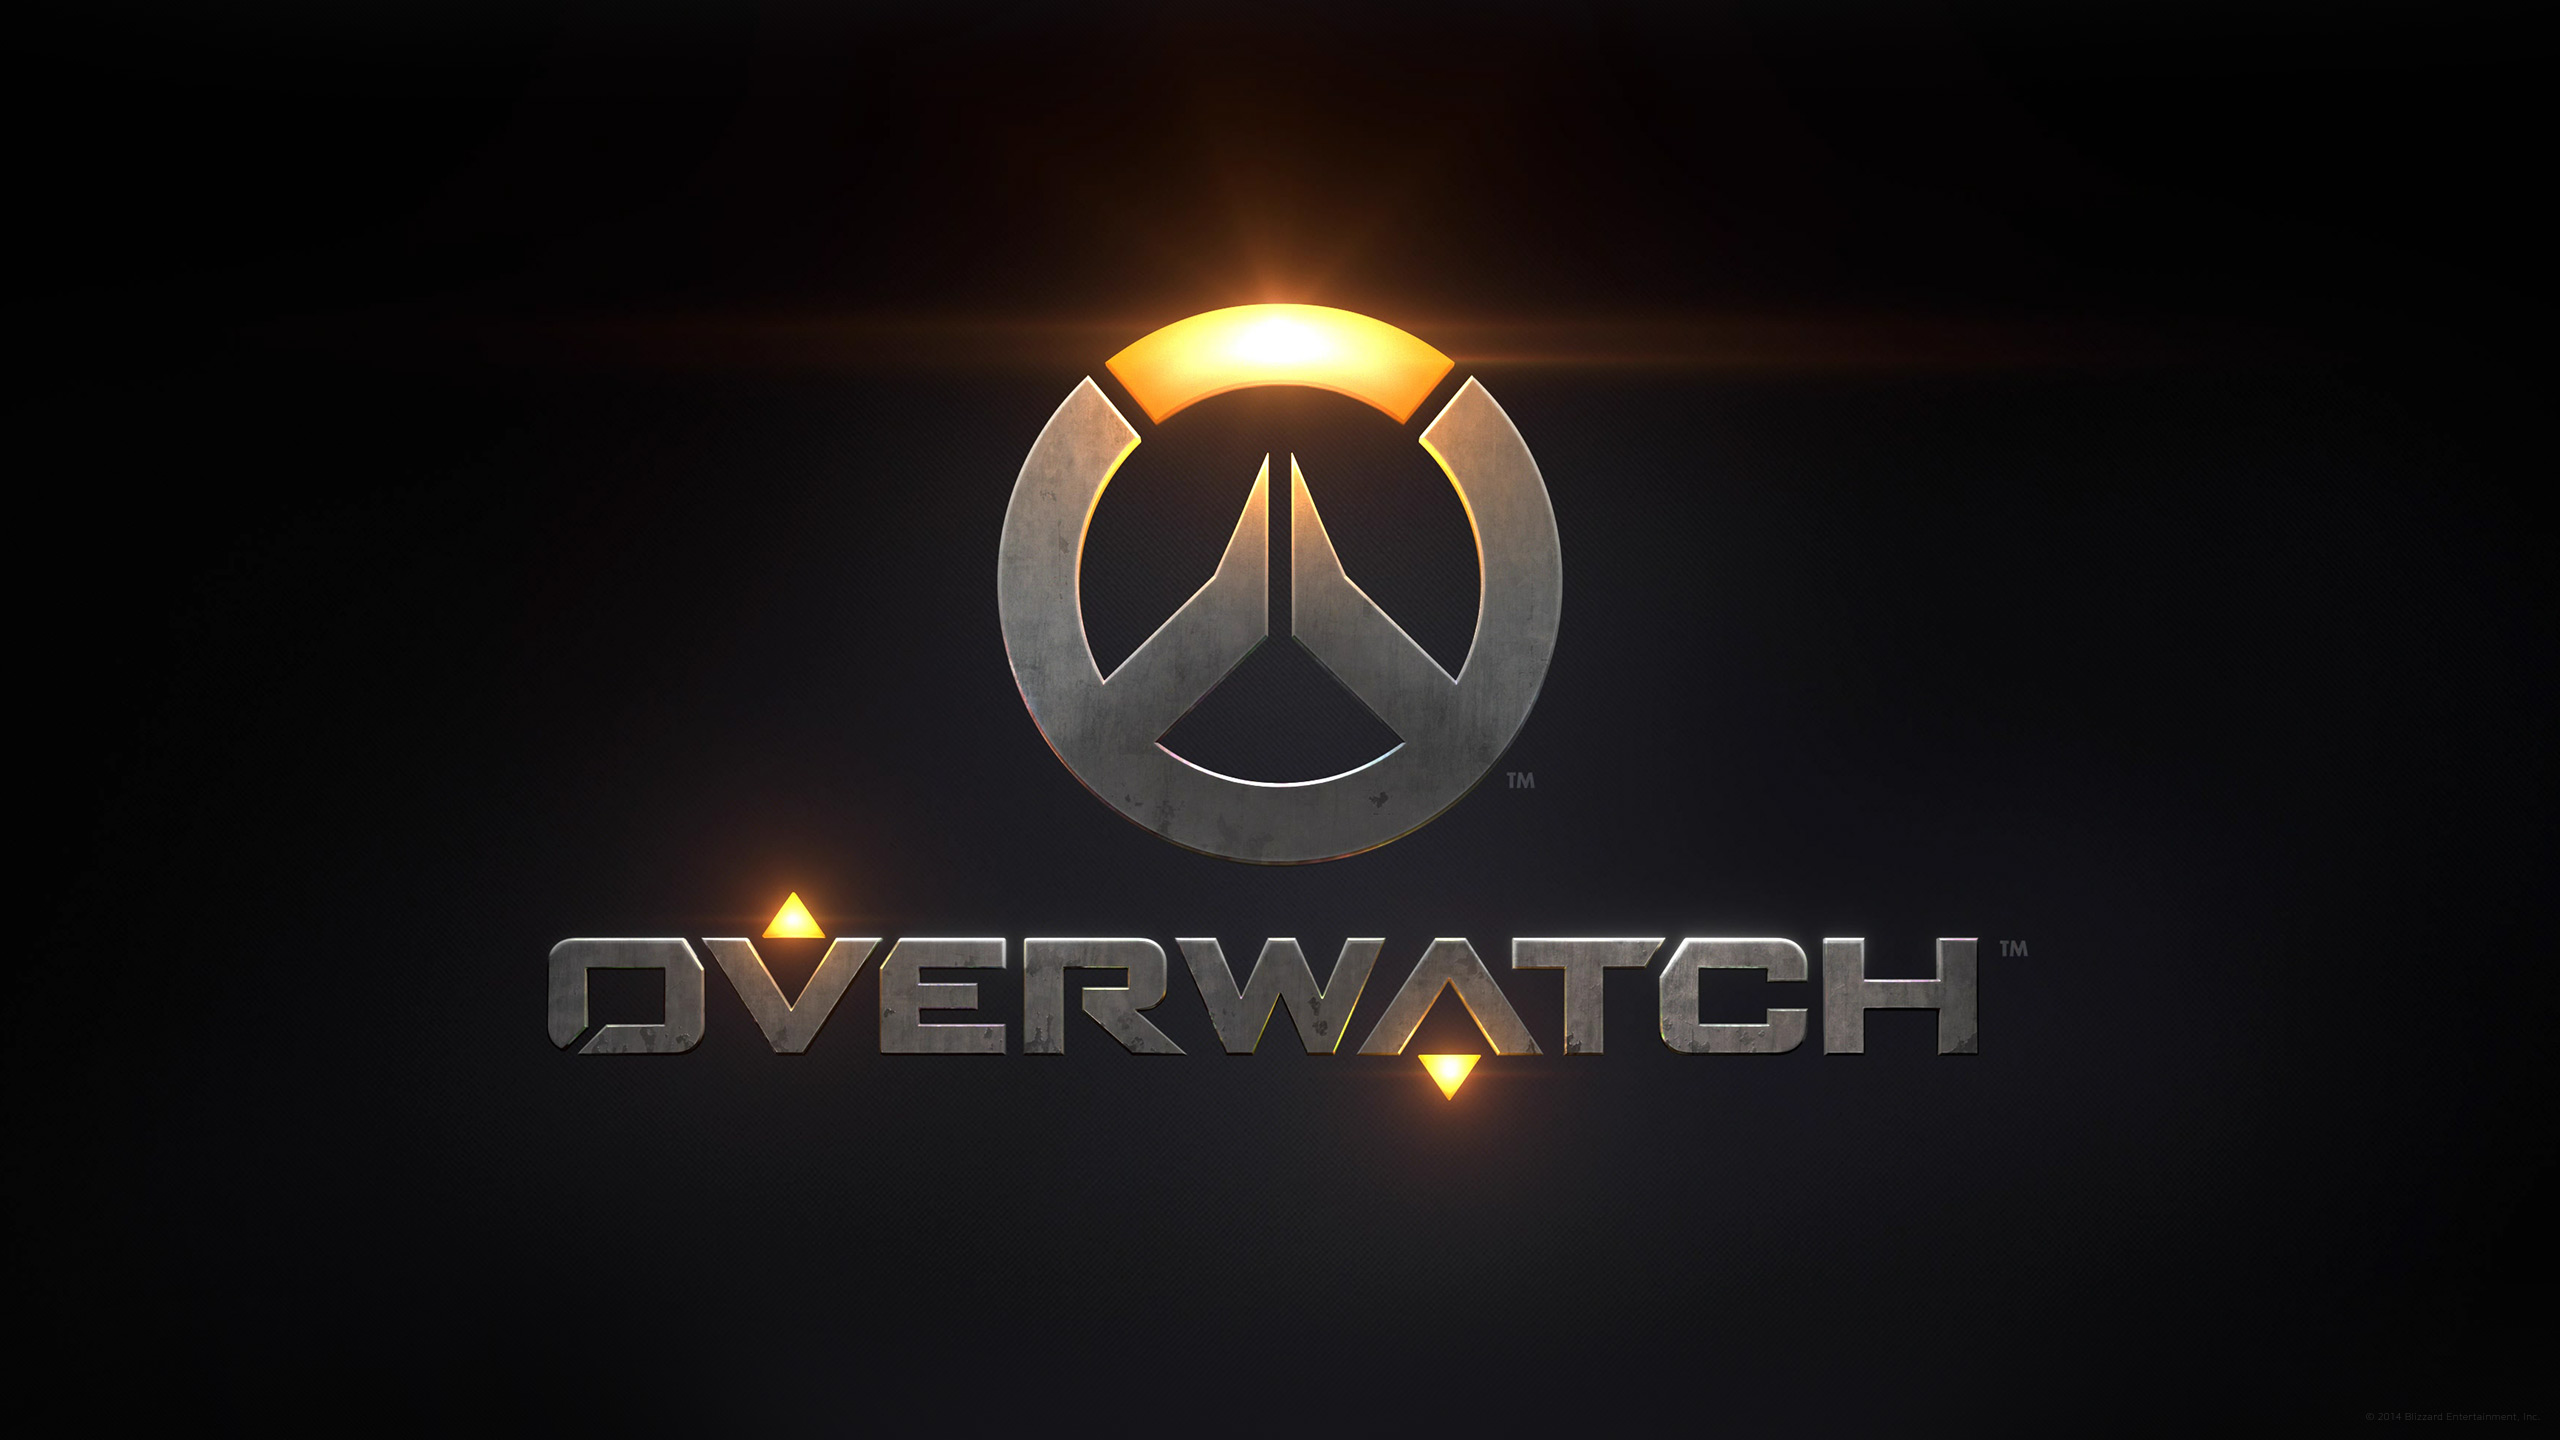 Overwatch Official Wallpaper Choose Your Hero And Fight For The